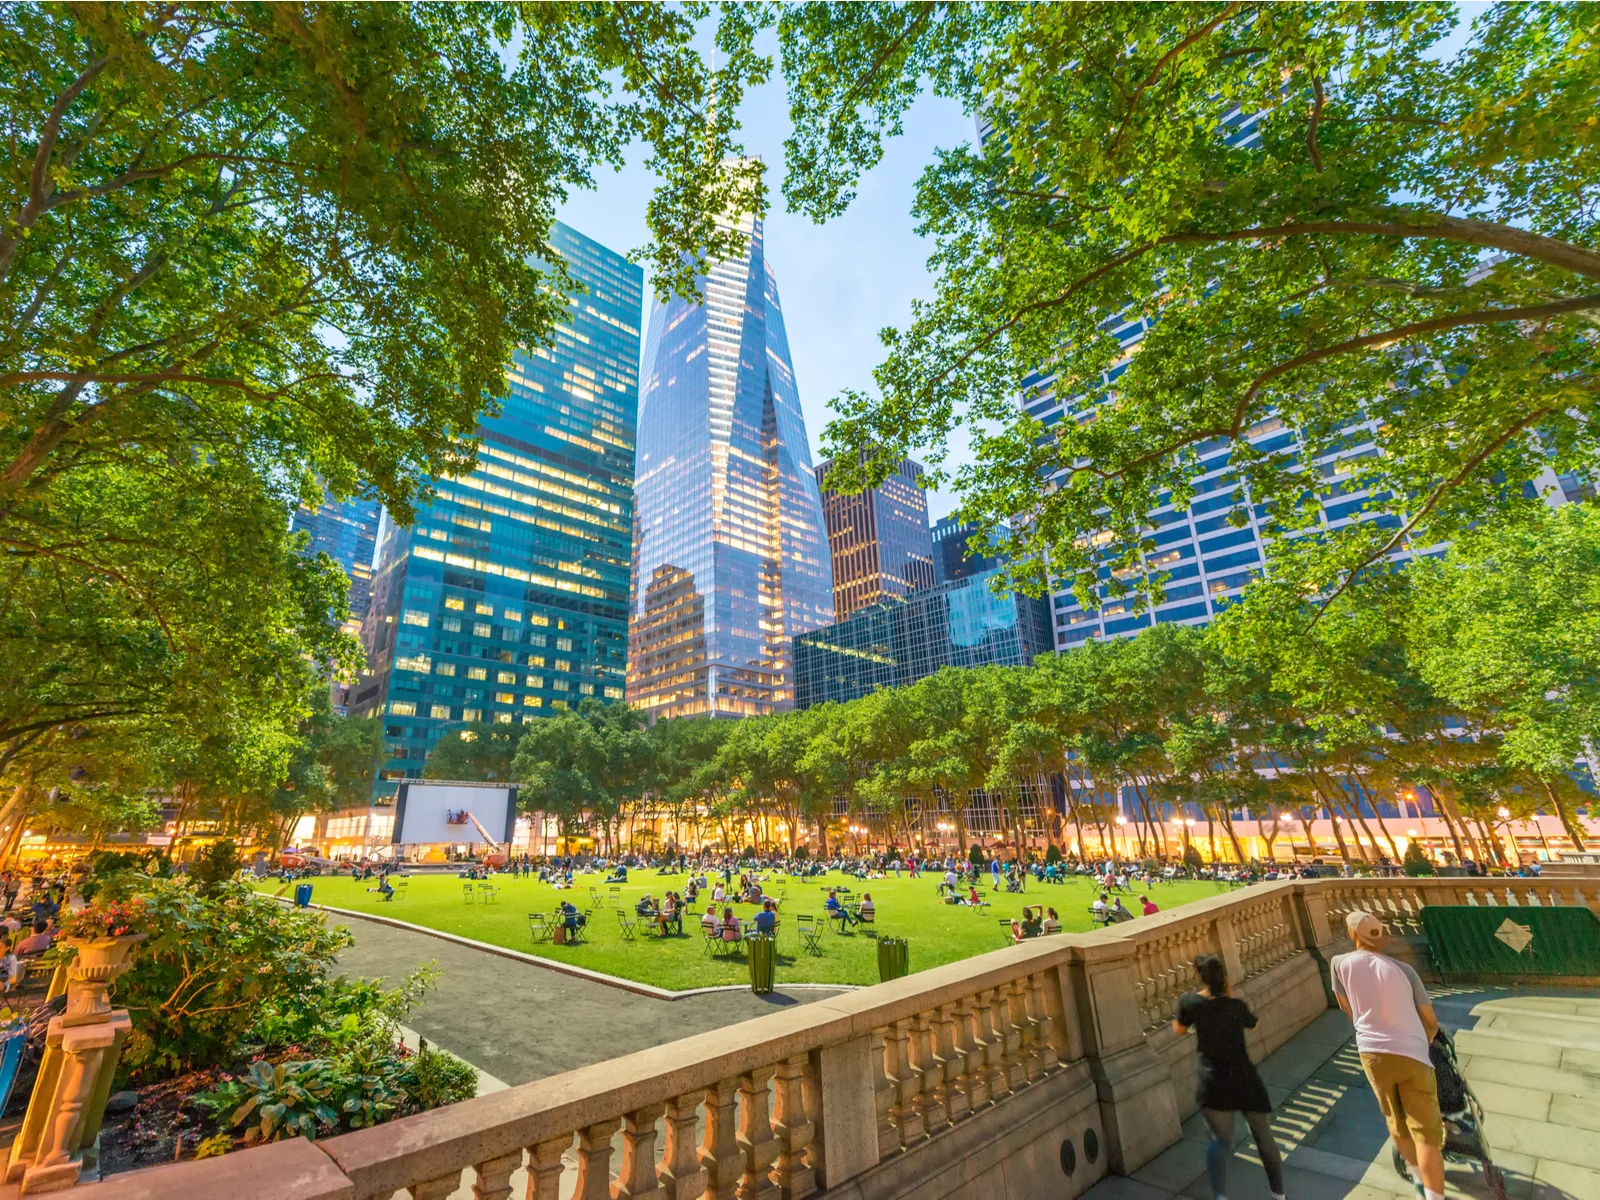 Bryant Park, one of the top things to do in New York City, pictured from the walkway with a stone railing in the foreground